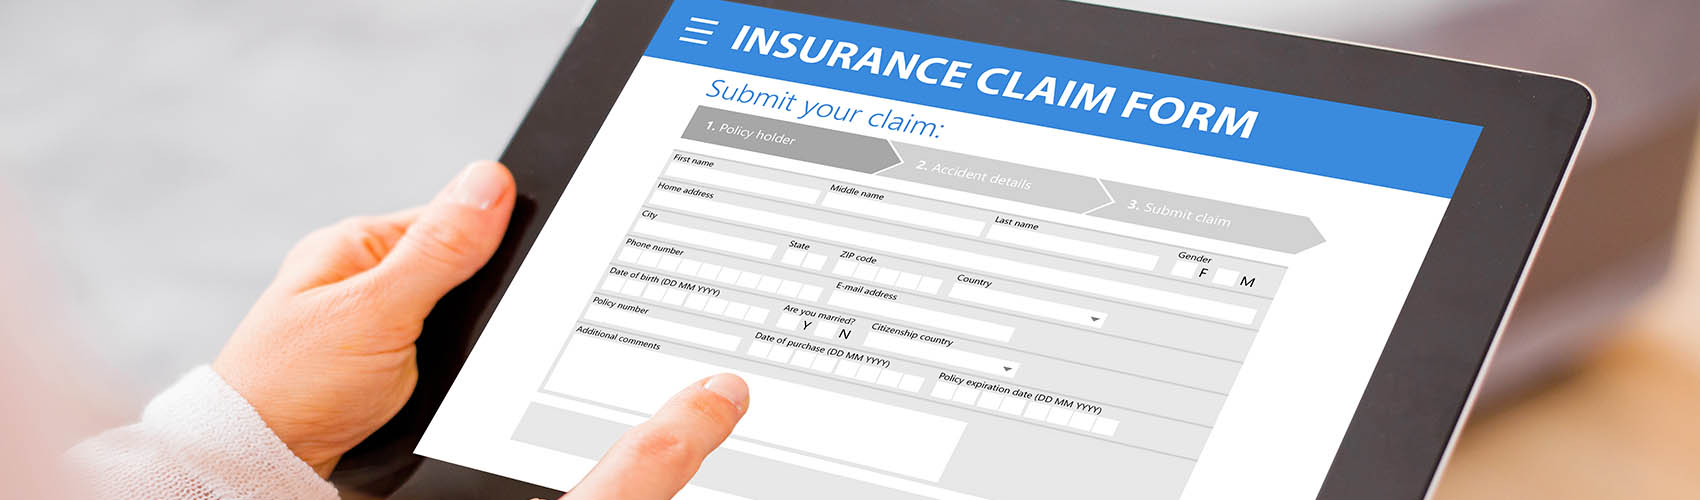 3 Things to Do to Make The Claim Process Easy